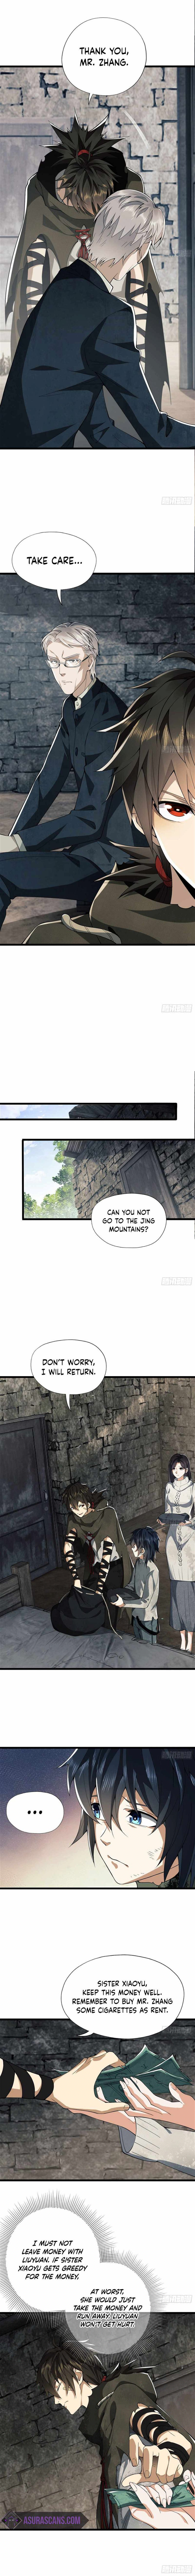 The First Sequence Chapter 16 page 3